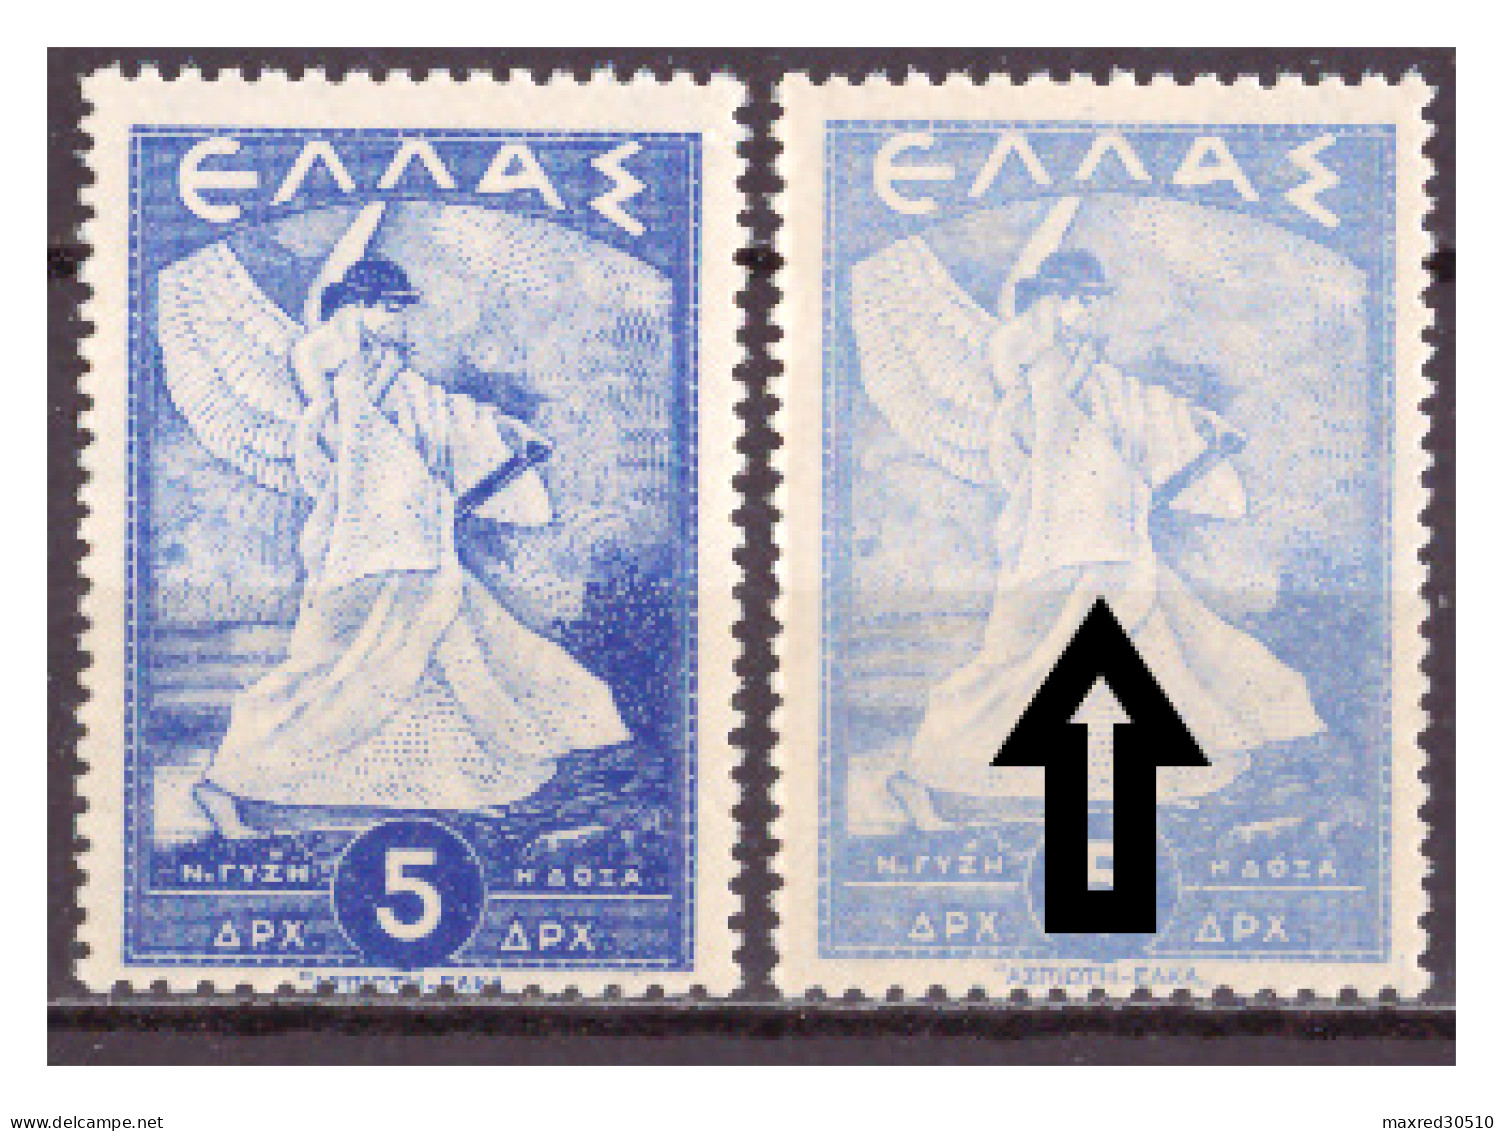 GREECE 1945 2X5L. OF THE "GLORY ISSUE" THE 2ND ONE (SEE ARROW) WITH CLEAR COLOR DIFFERENCE ERROR MNH - Errors, Freaks & Oddities (EFO)